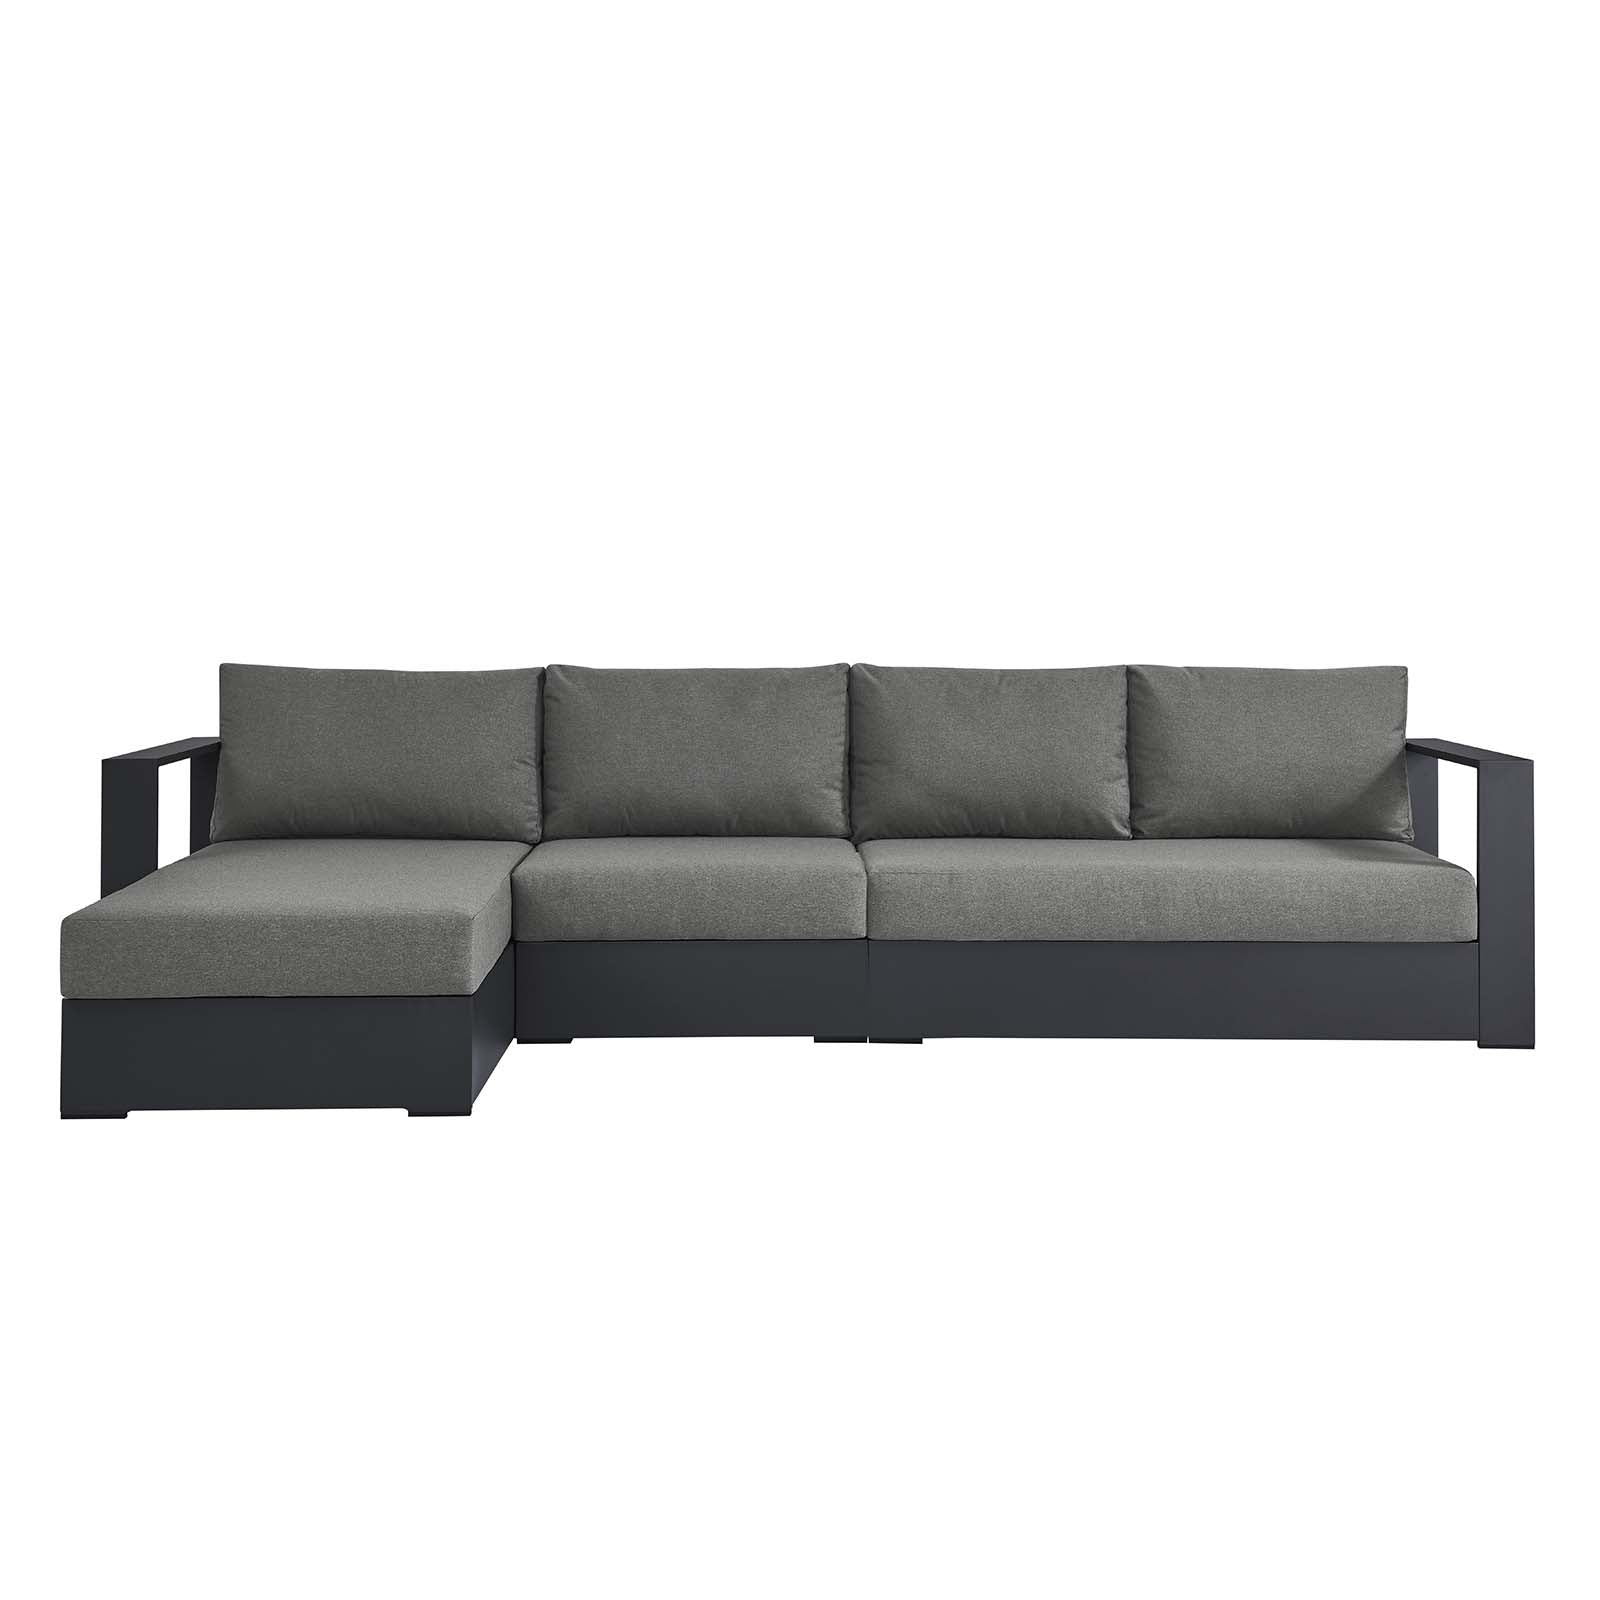 Tahoe Outdoor Patio Powder-Coated Aluminum 3-Piece Left-Facing Chaise Sectional Sofa Set